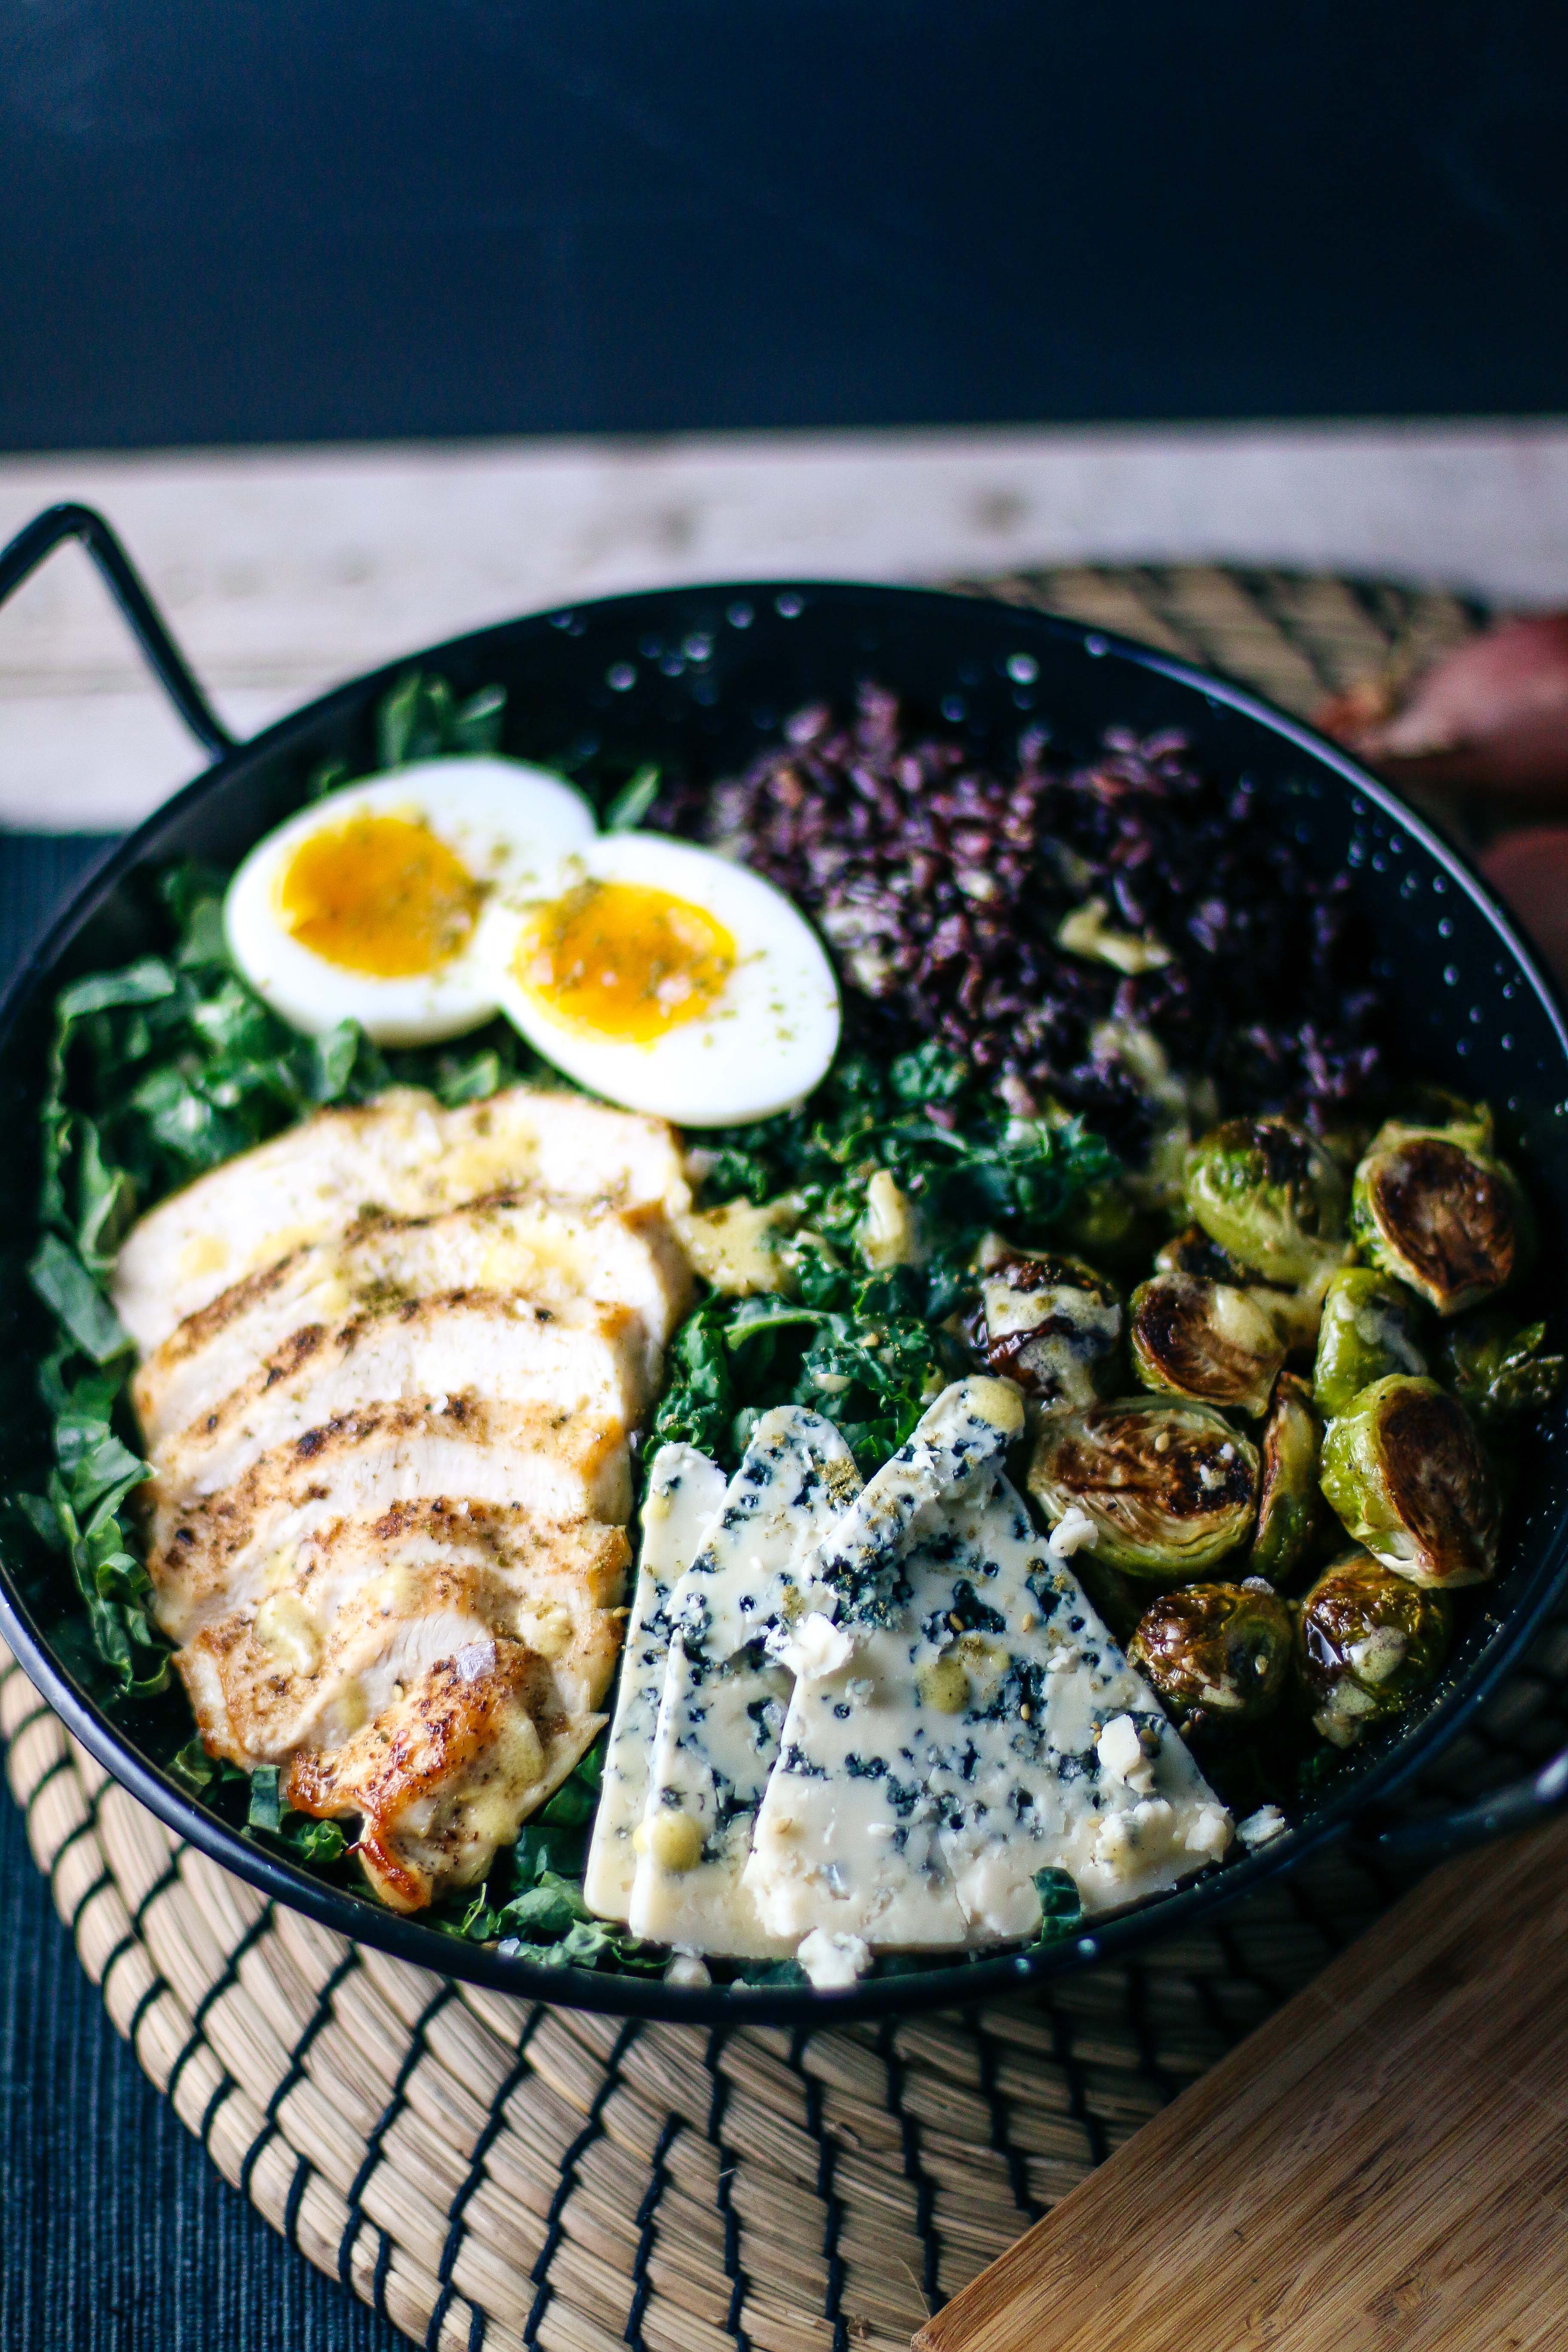 Winter Chicken & Kale Salad with Roasted Brussel Sprouts, Blue Cheese & Wild Rice with Shallot Vinaigrette | I Will Not Eat Oysters